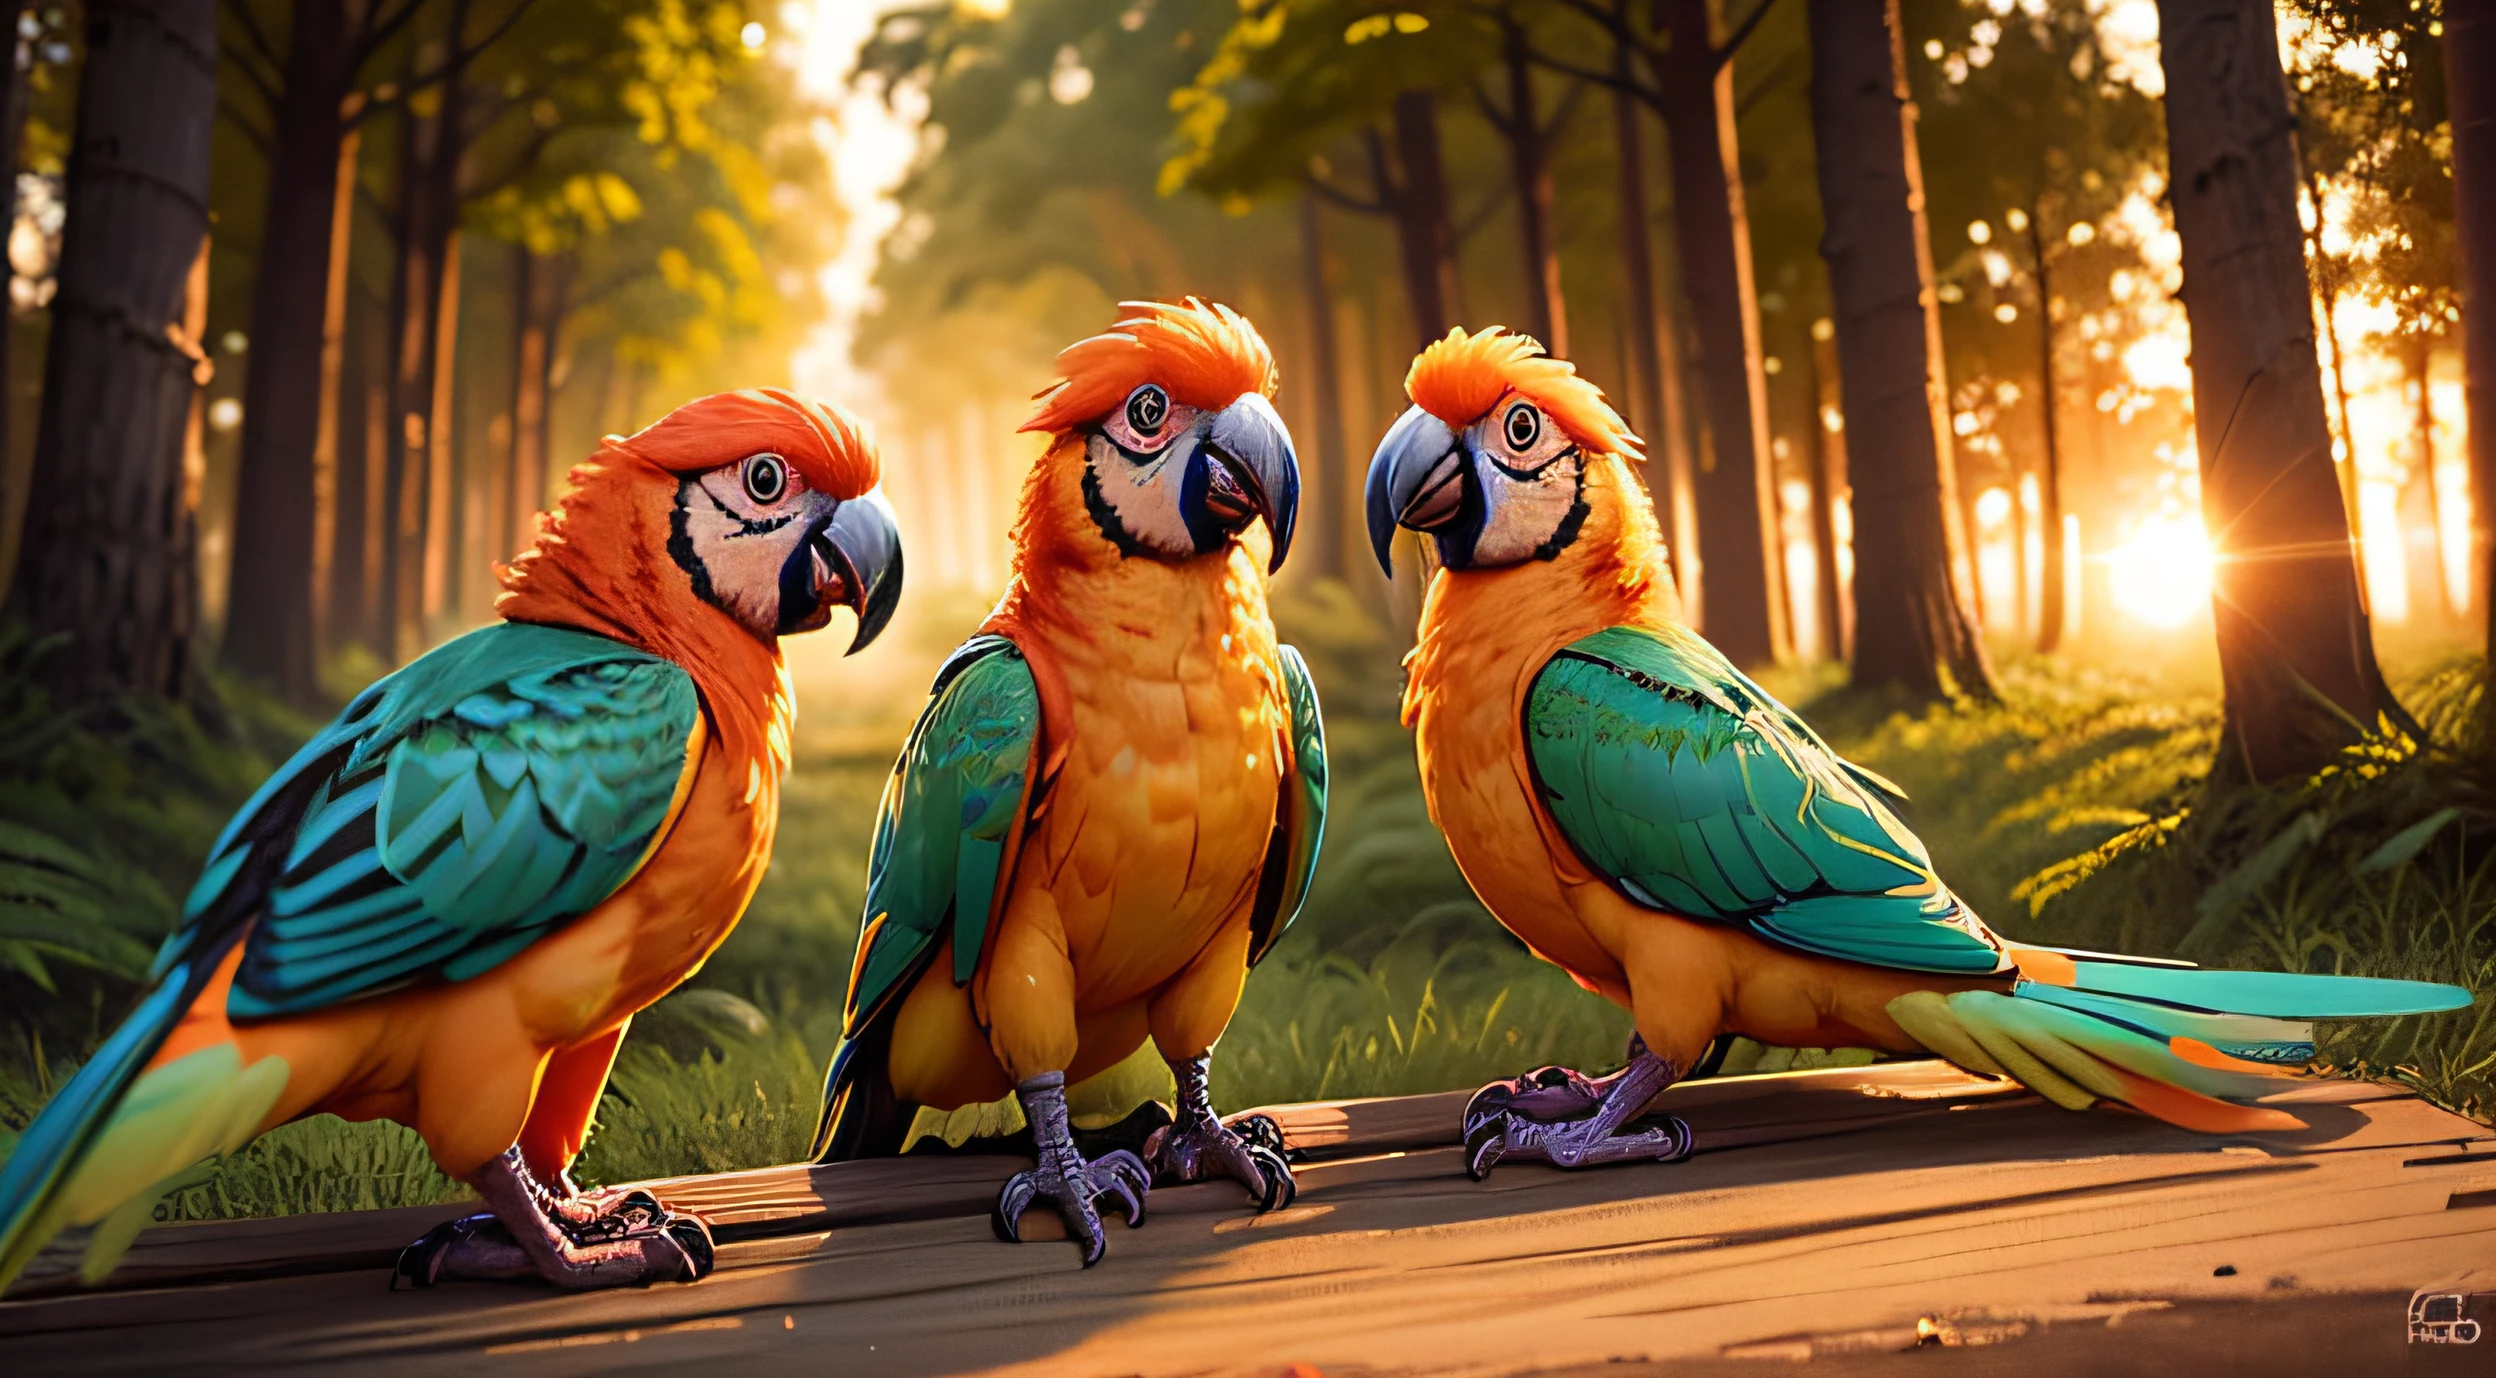  on forest with orange parrots, Pixar Style Movie, so cute, pretty eyes, so cute, bright eyes, adorables orange parrots, full orange color parrots, dancing parrots, Campfire in the Glade, amazing sunset